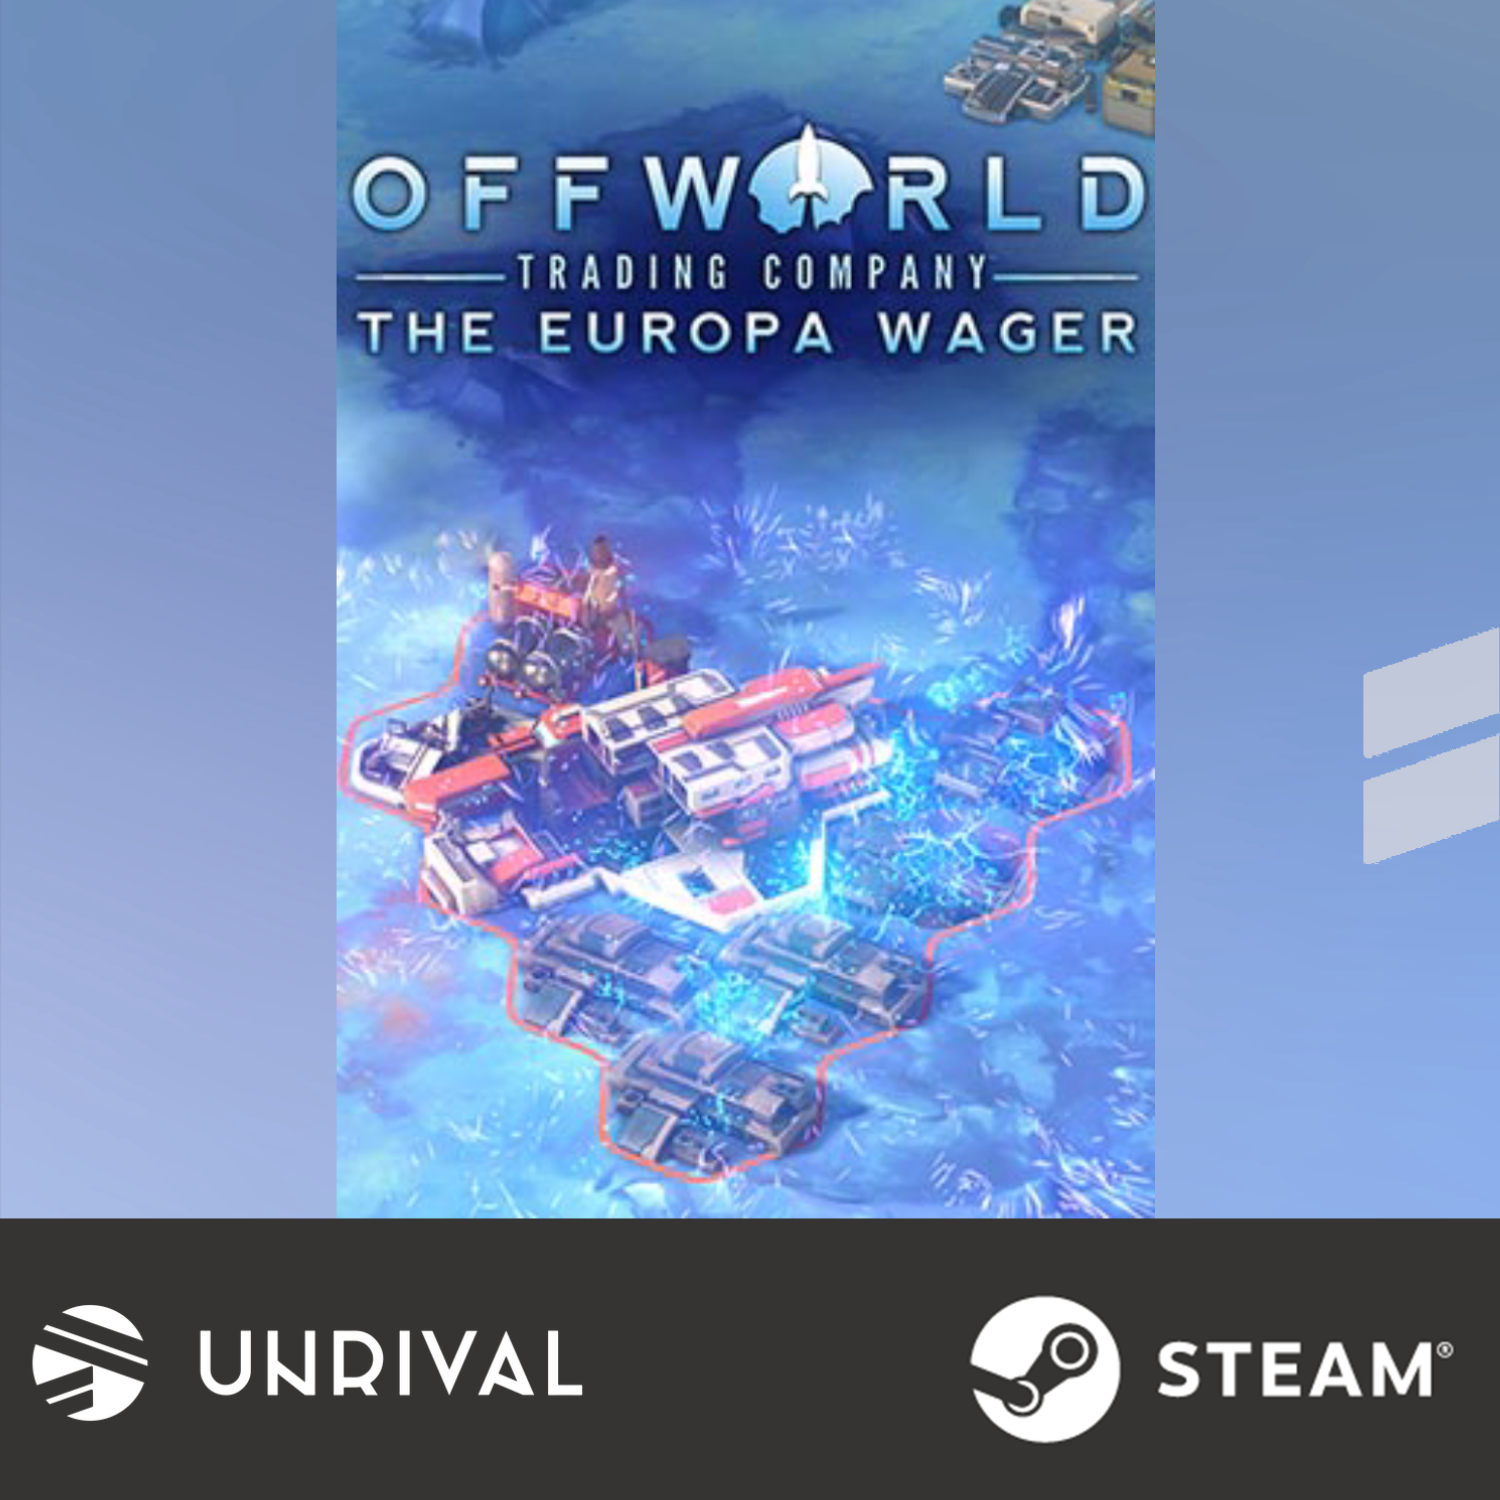 Offworld Trading Company - The Europa Wager Expansion PC Digital Download Game - Unrival